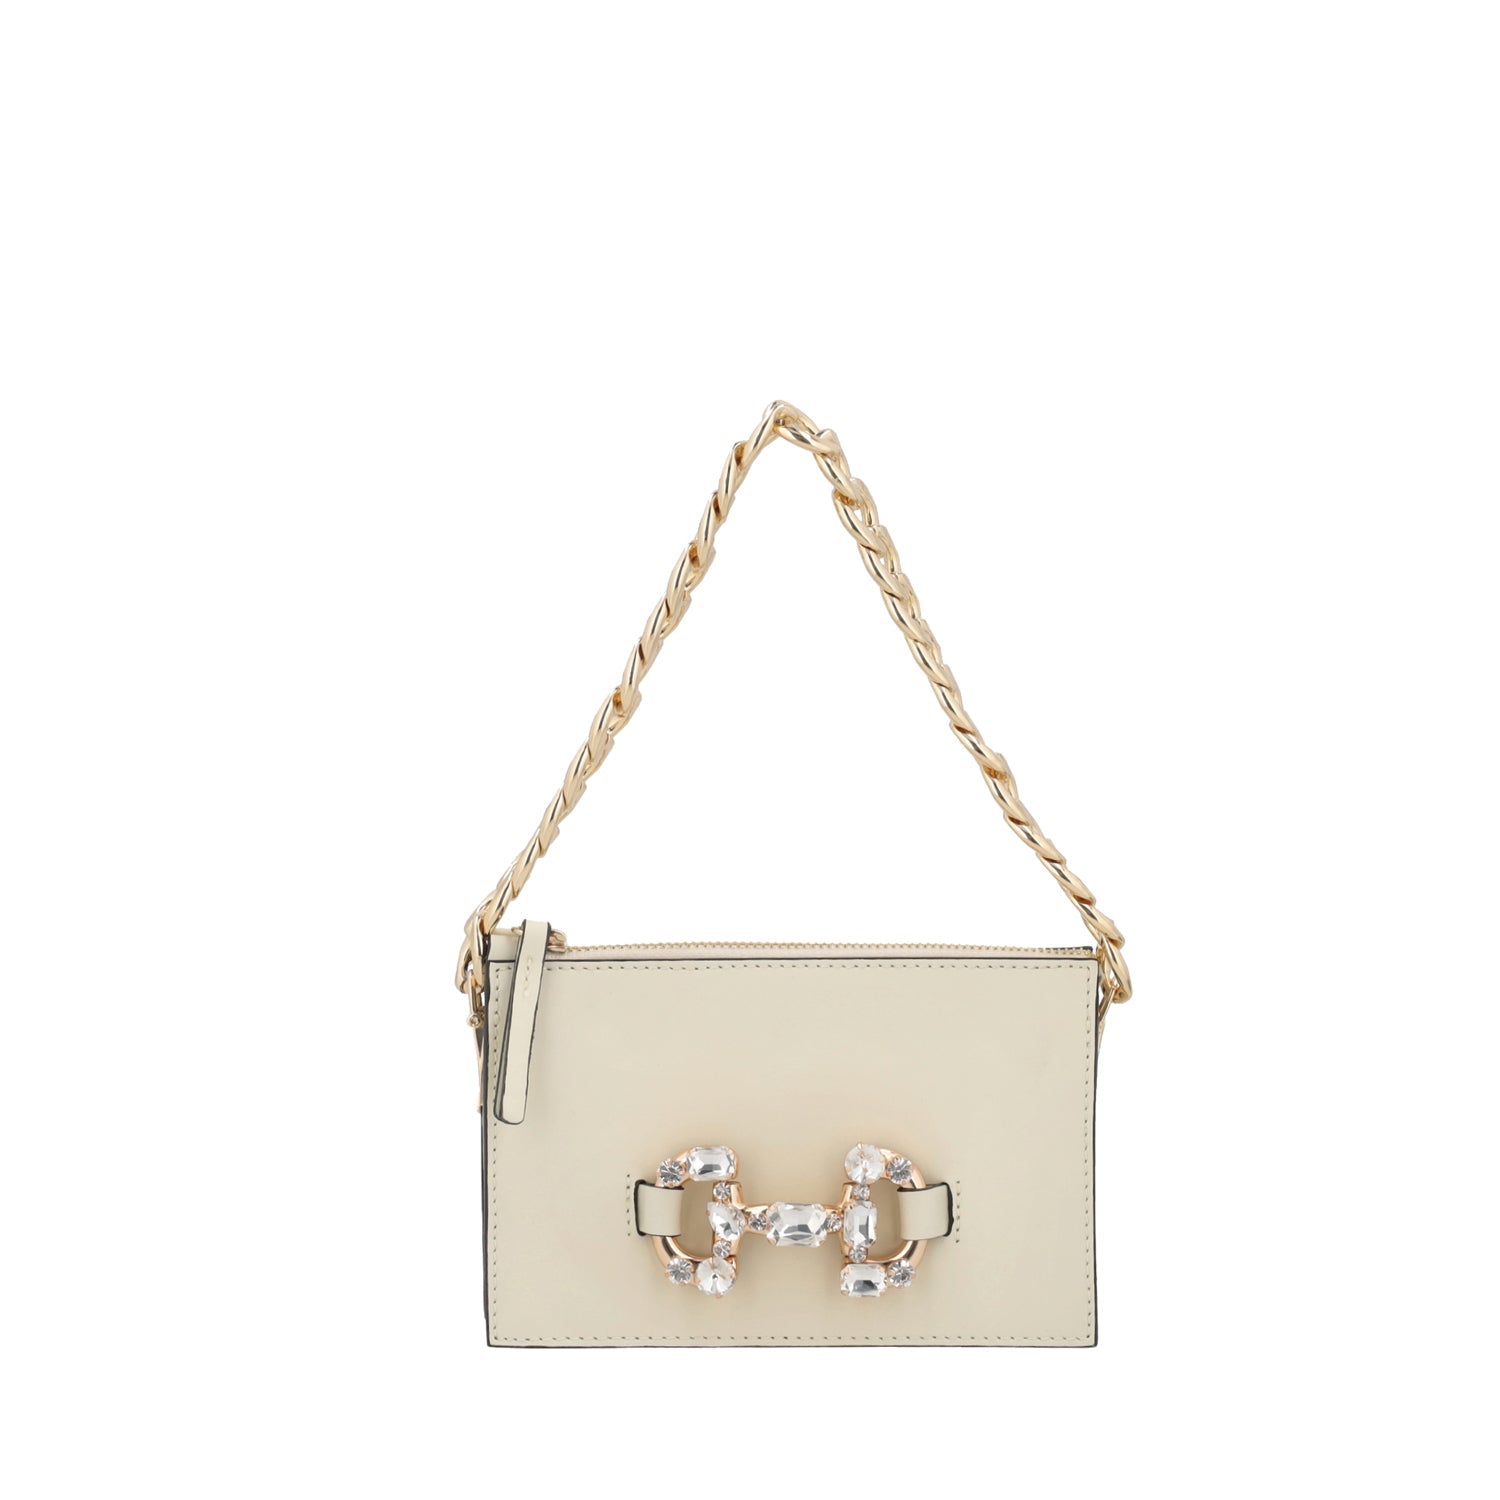 IVORY BOUQUET CROSSBODY BAG WITH JEWEL ACCESSORY